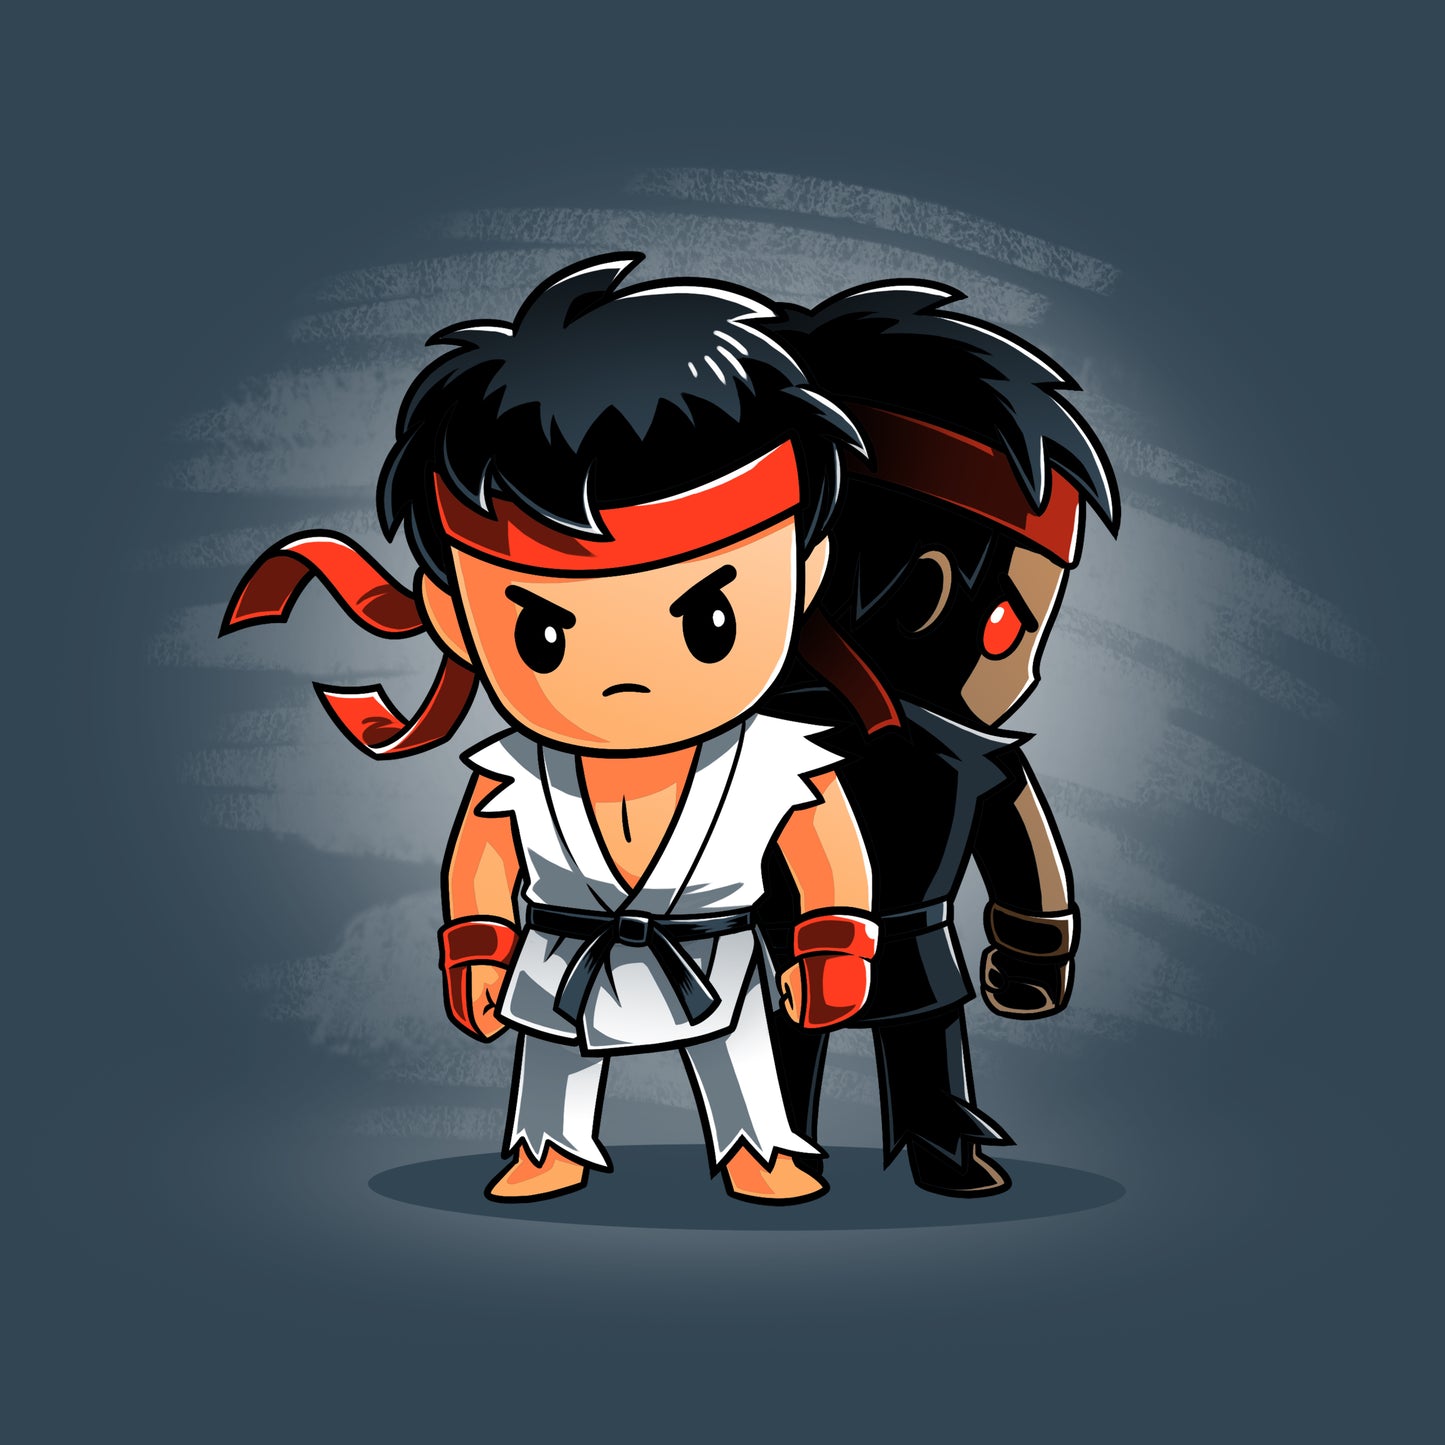 Two Street Fighter characters standing next to each other wearing T-shirts representing the Satsui no Hado, featuring Ryu and Evil Ryu from Capcom.